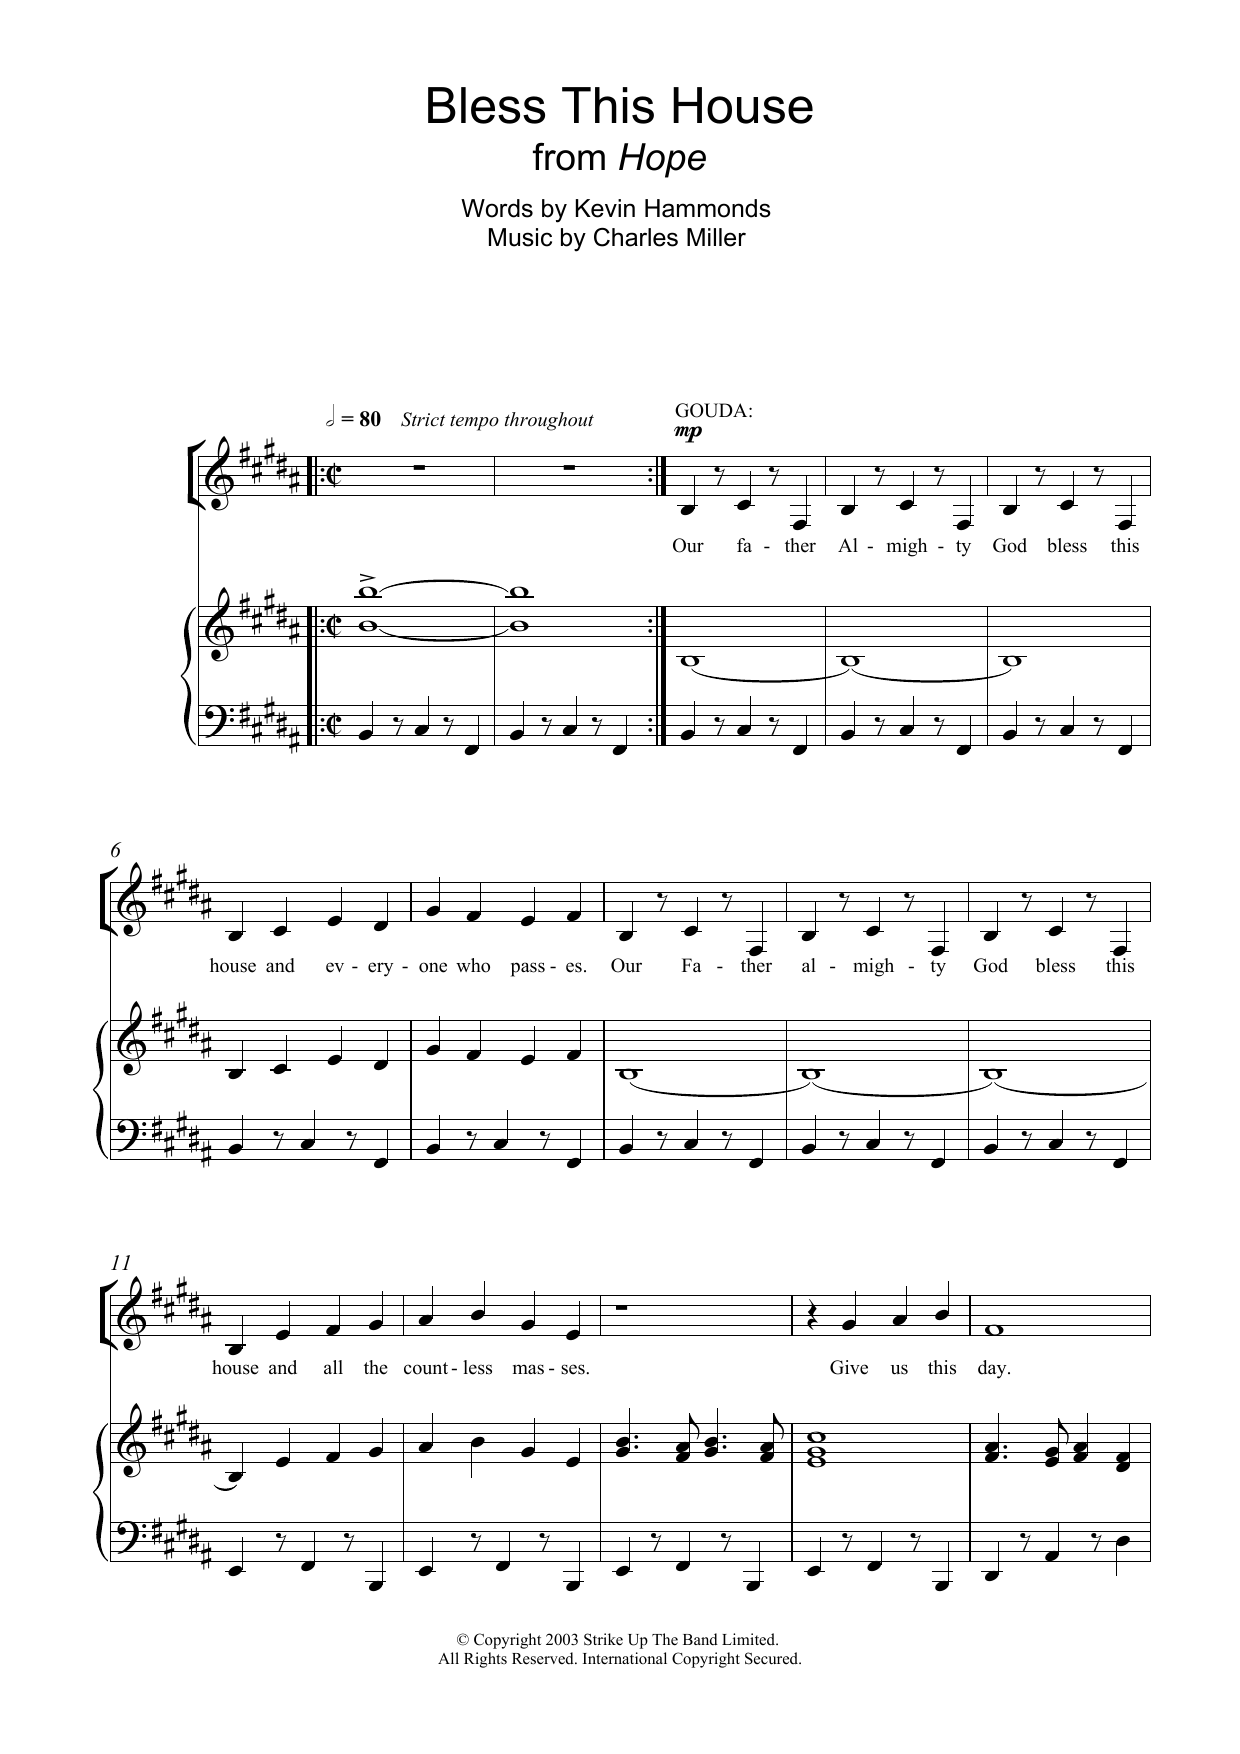 Download Charles Miller & Kevin Hammonds Bless This House (From Hope) Sheet Music